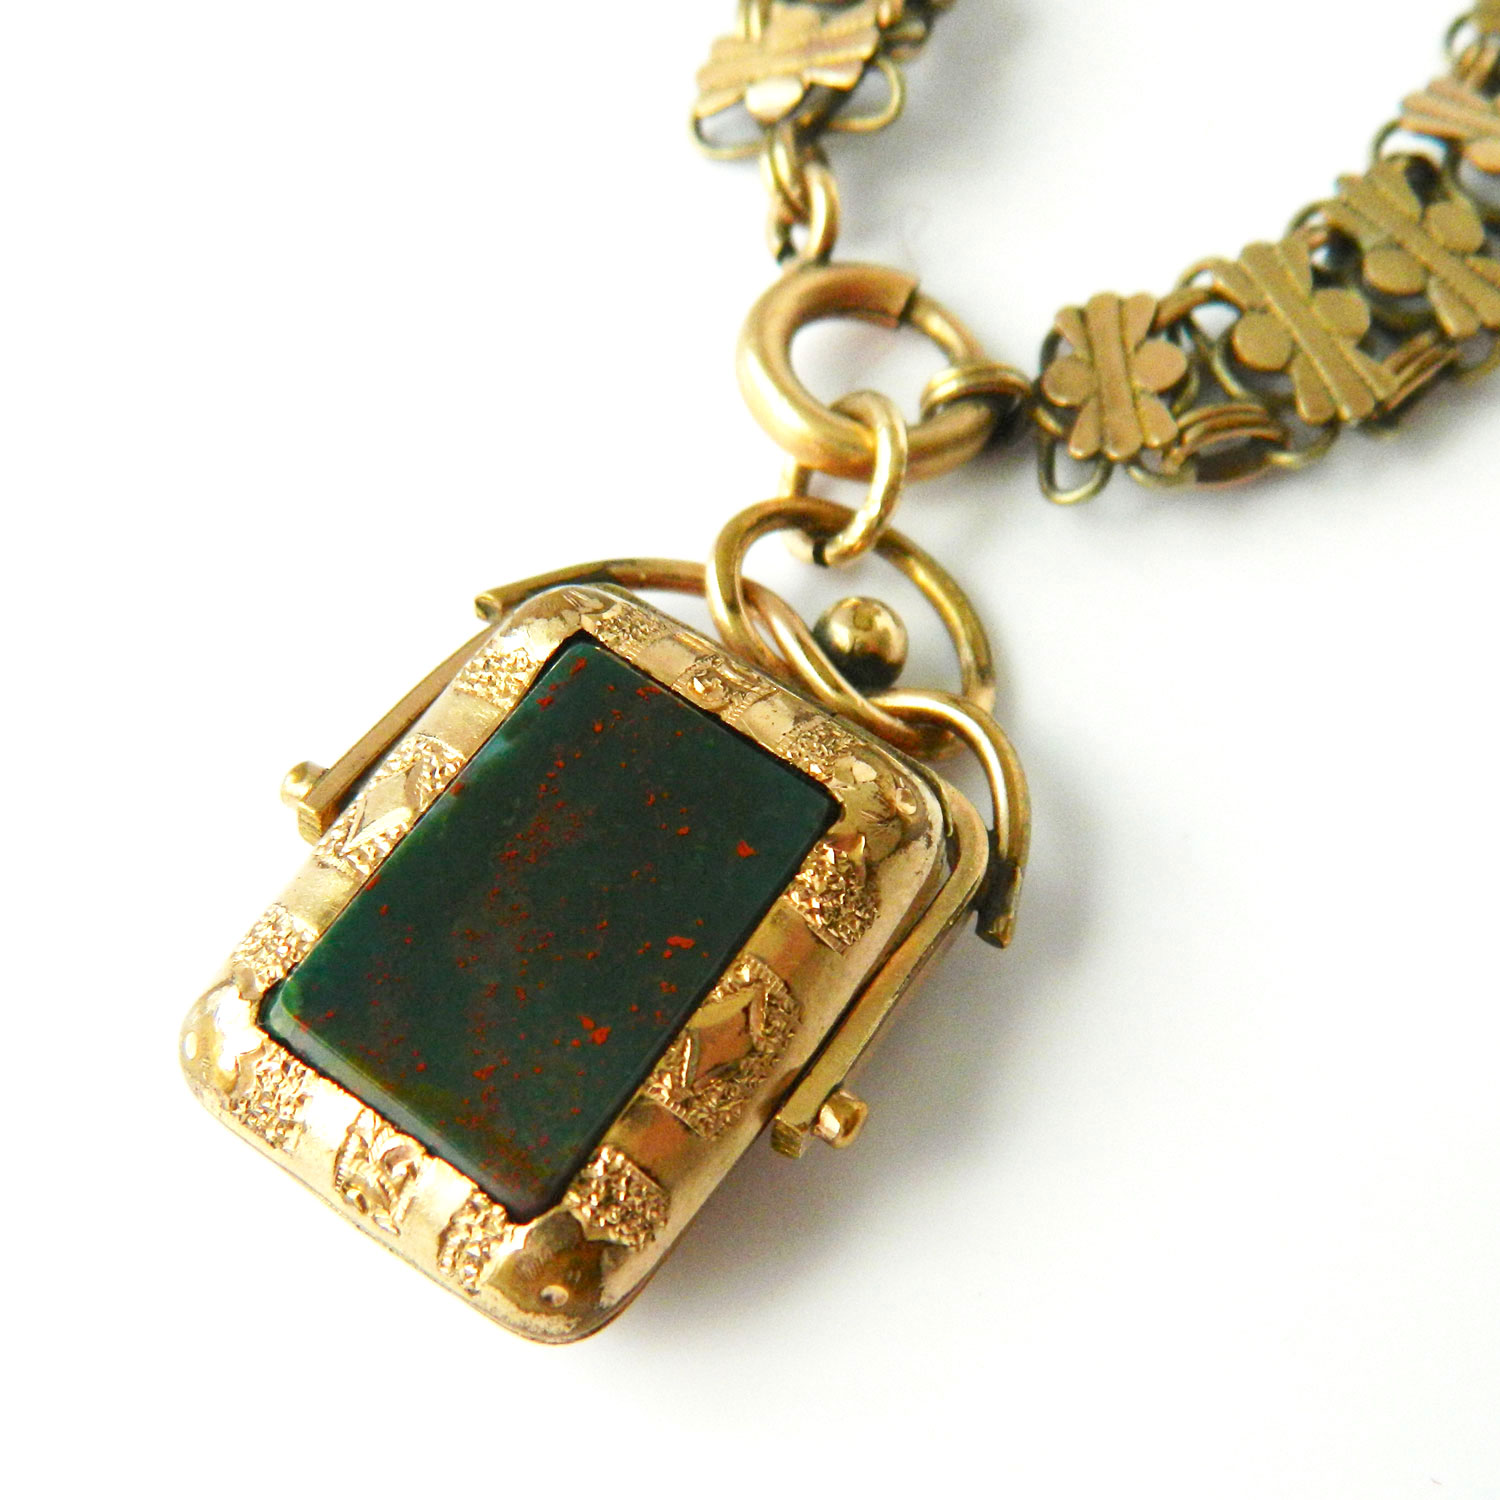 Antique spinning watch fob locket necklace